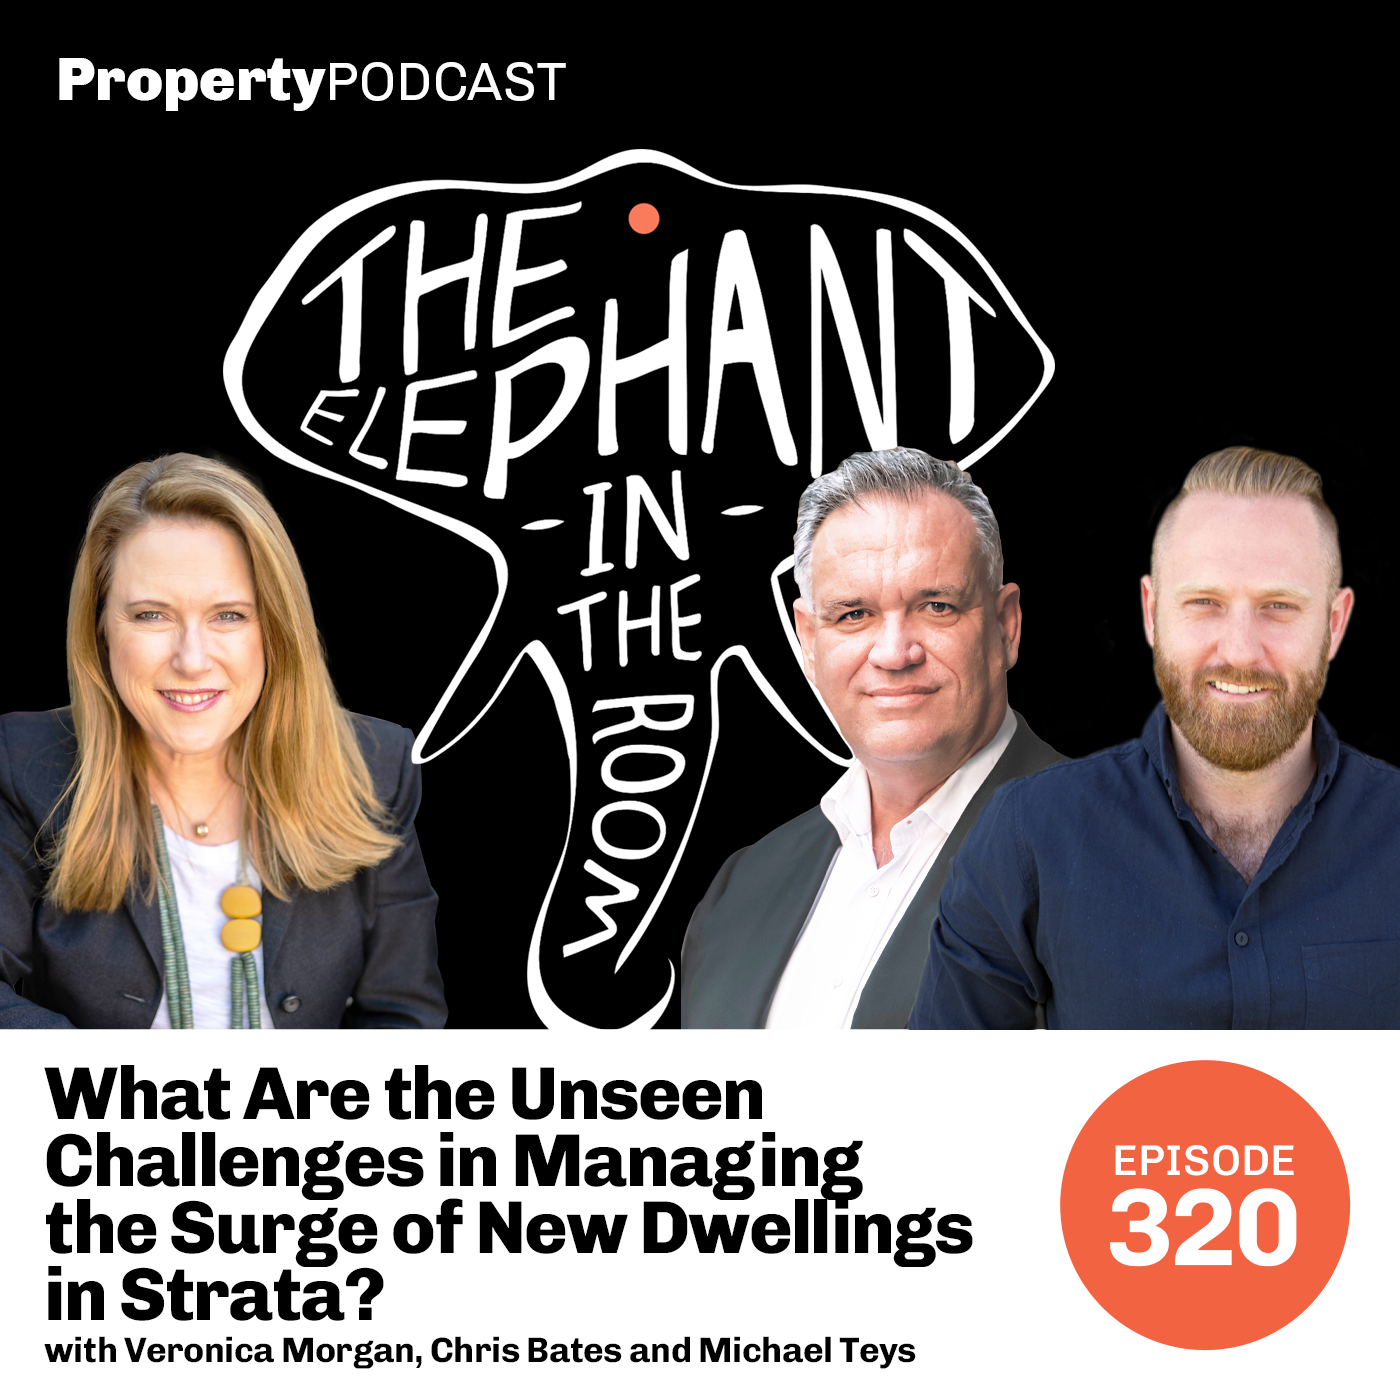 What Are the Unseen Challenges in Managing the Surge of New Dwellings in Strata?